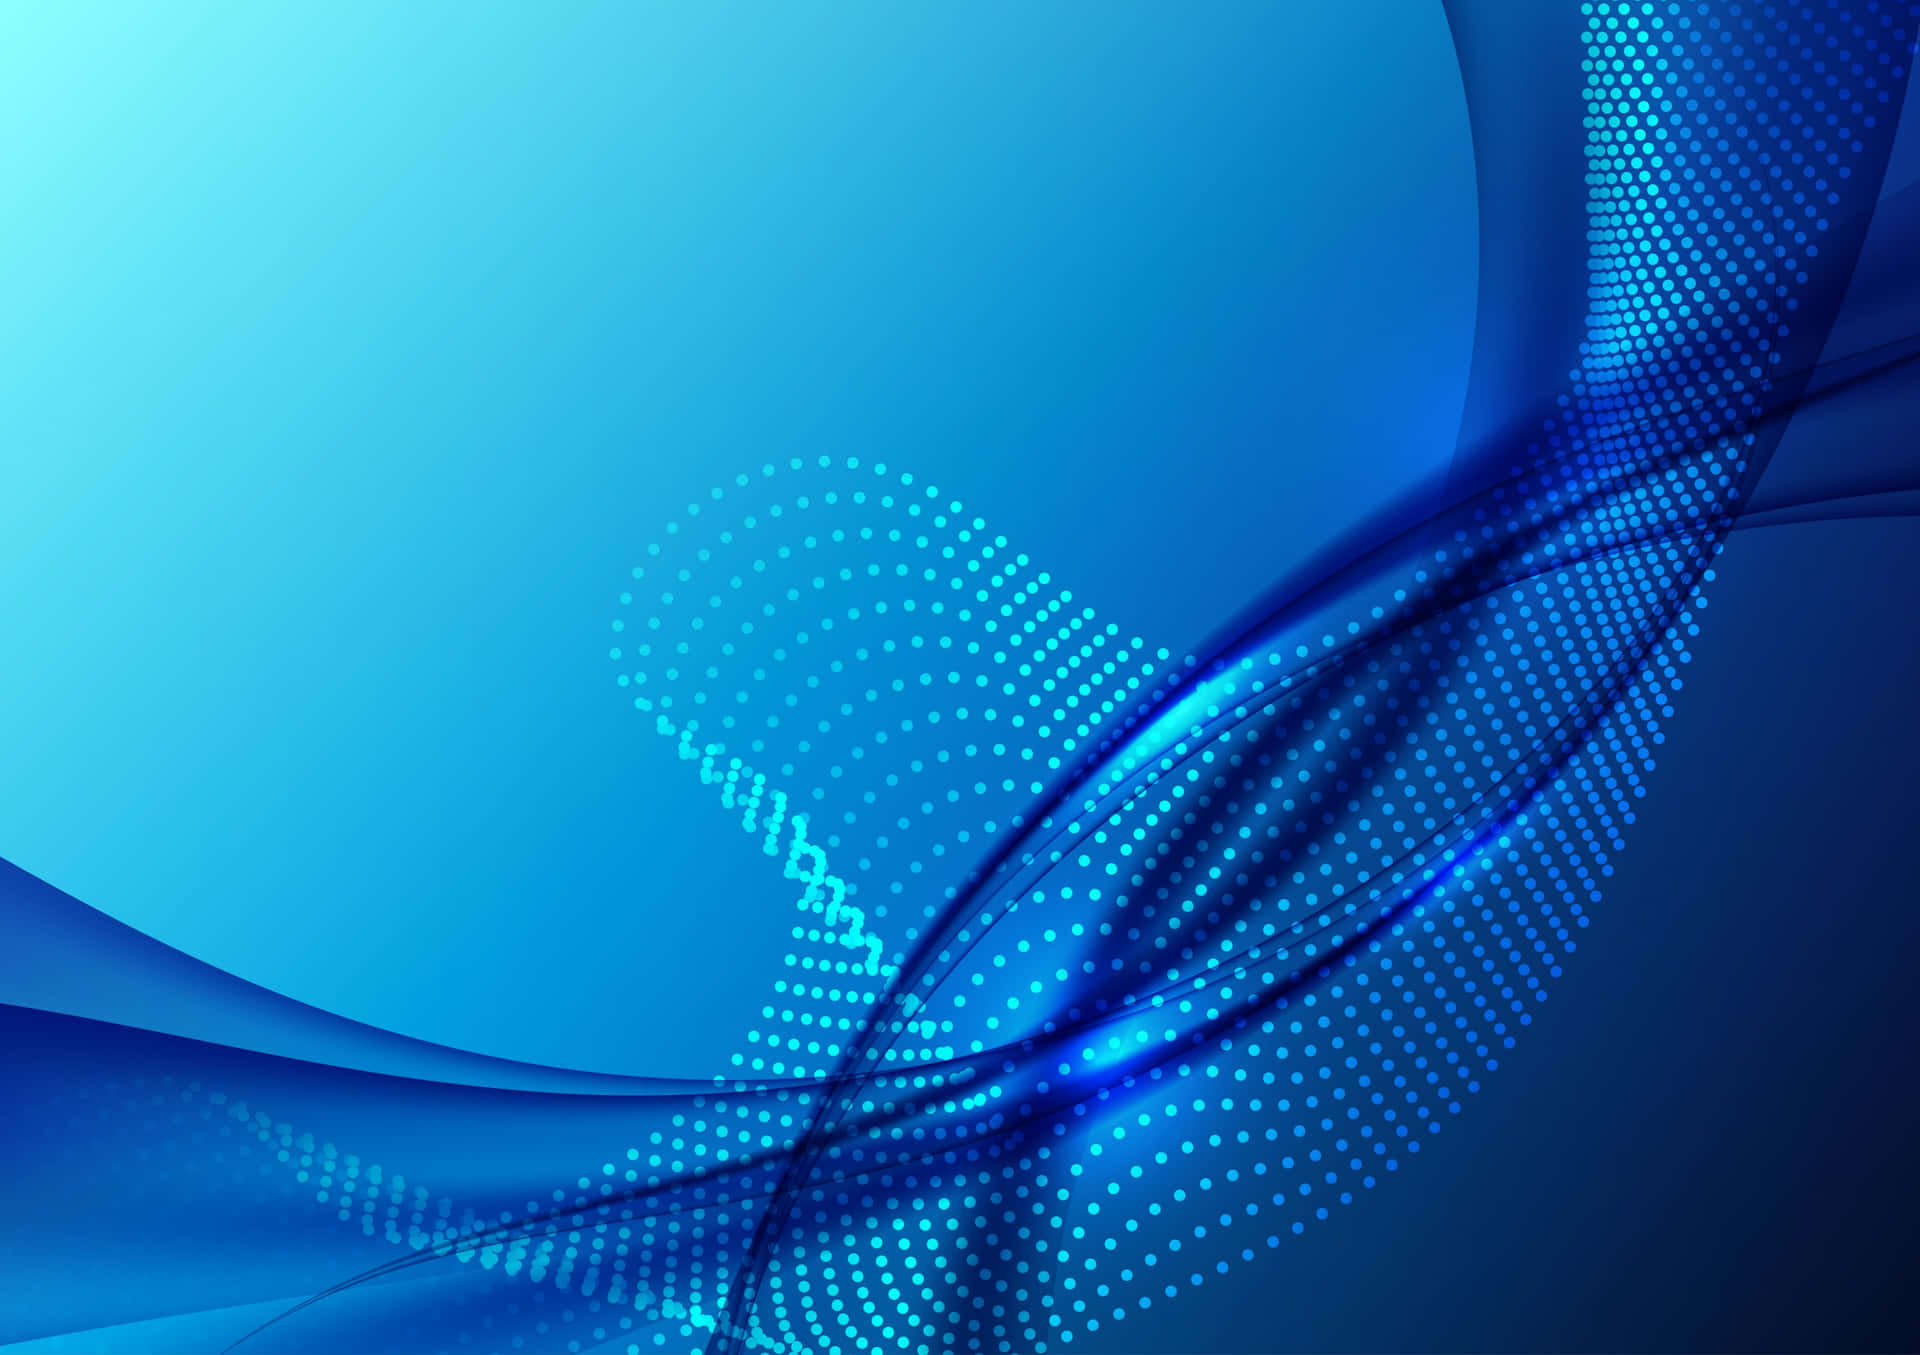 Blue Abstract Background With A Wave Pattern